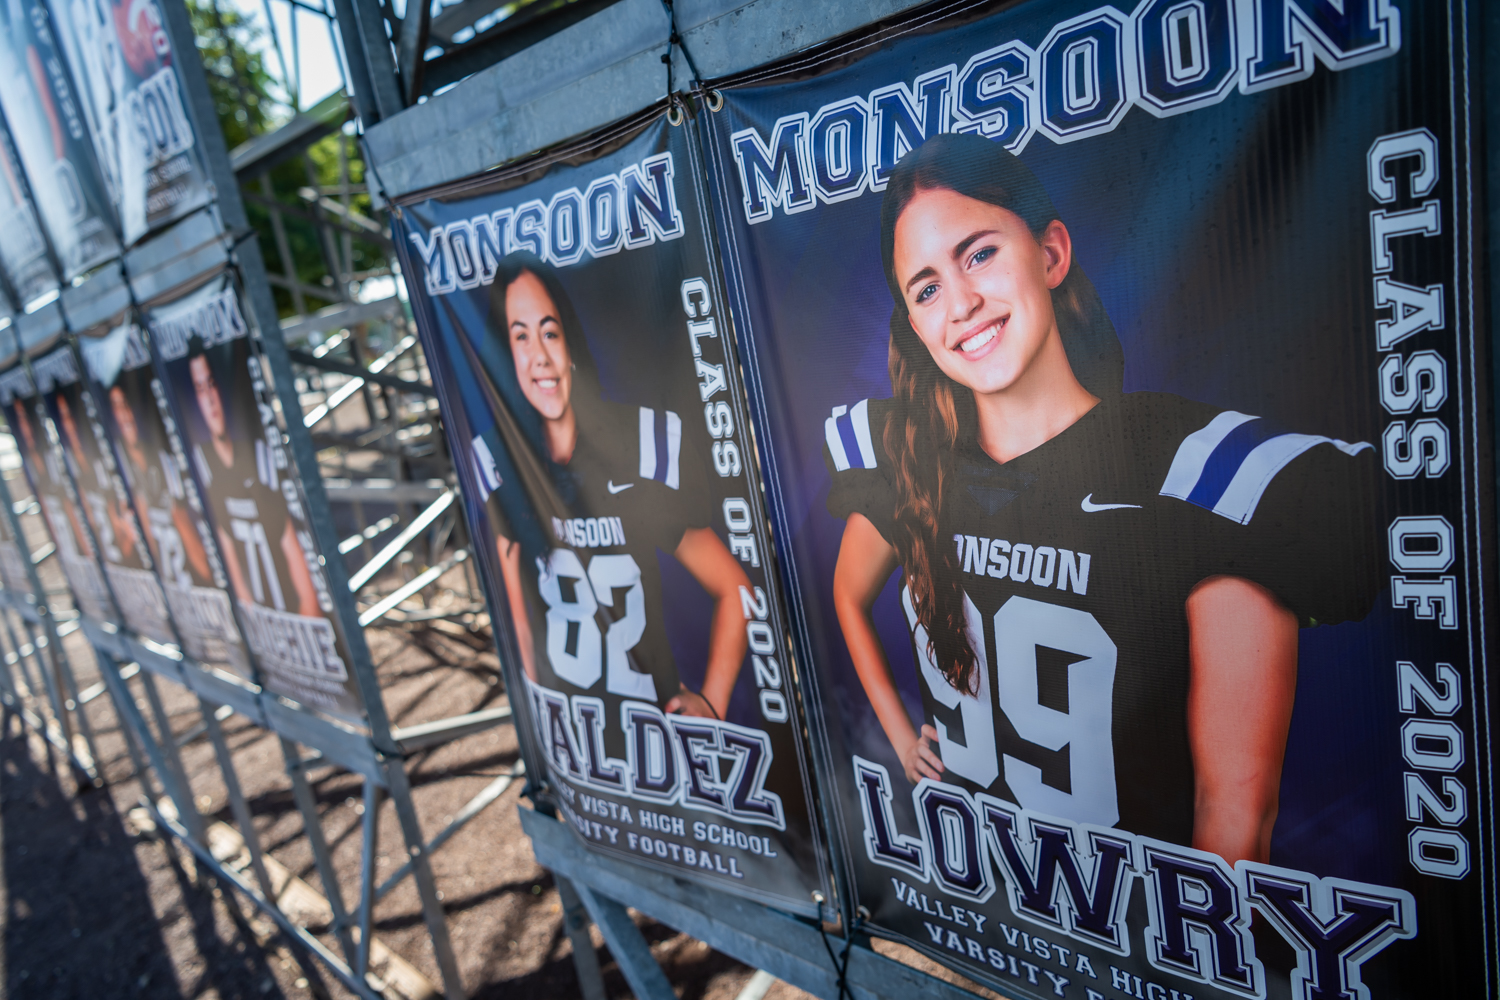 A picture of Valley Vista Football banners featuring the girls